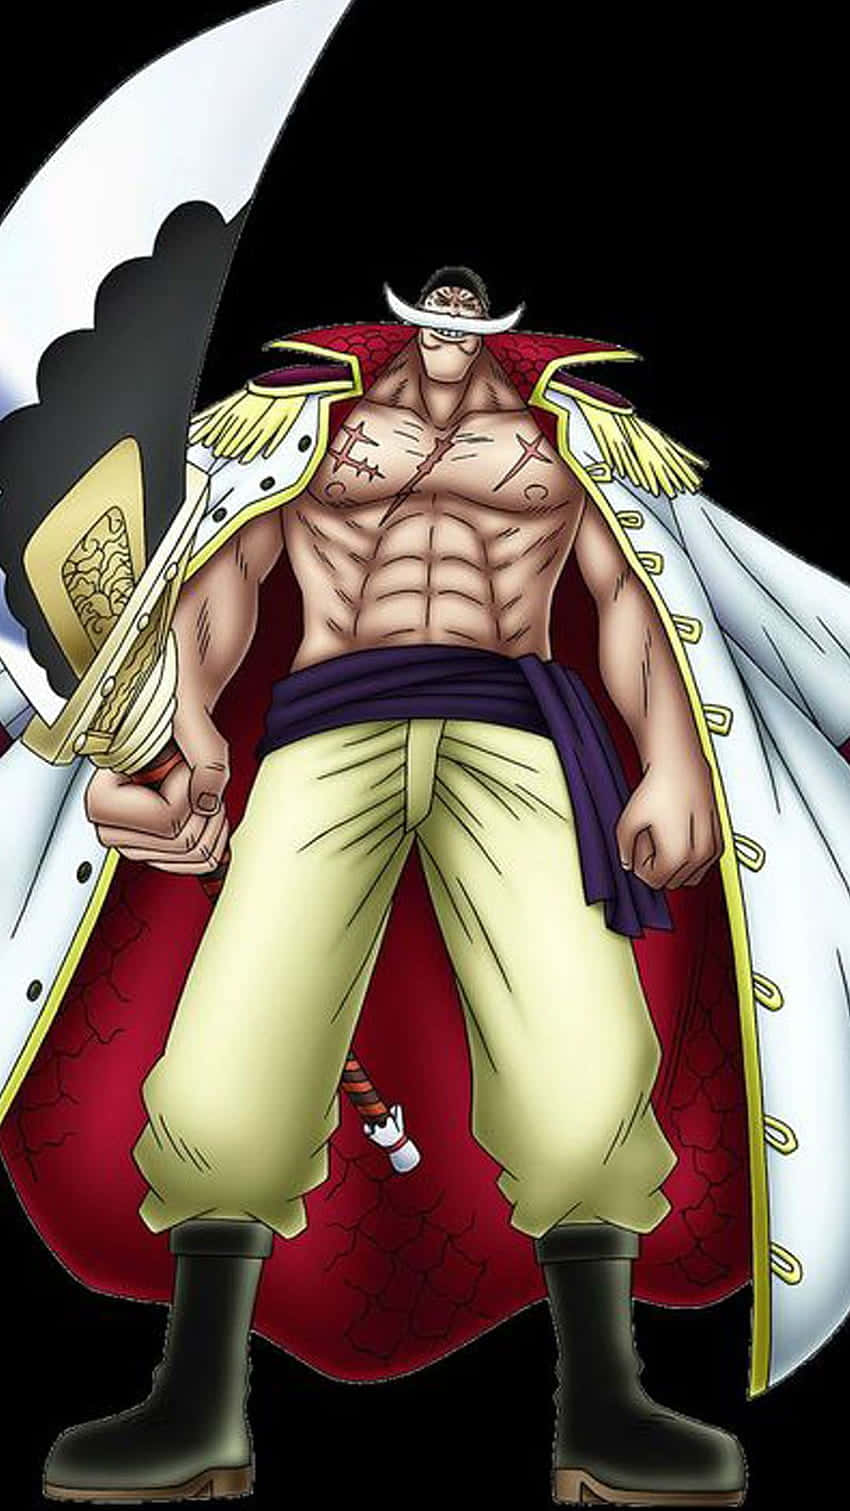 Whitebeard, Strongest and Most Feared Pirate of the Sea" Wallpaper